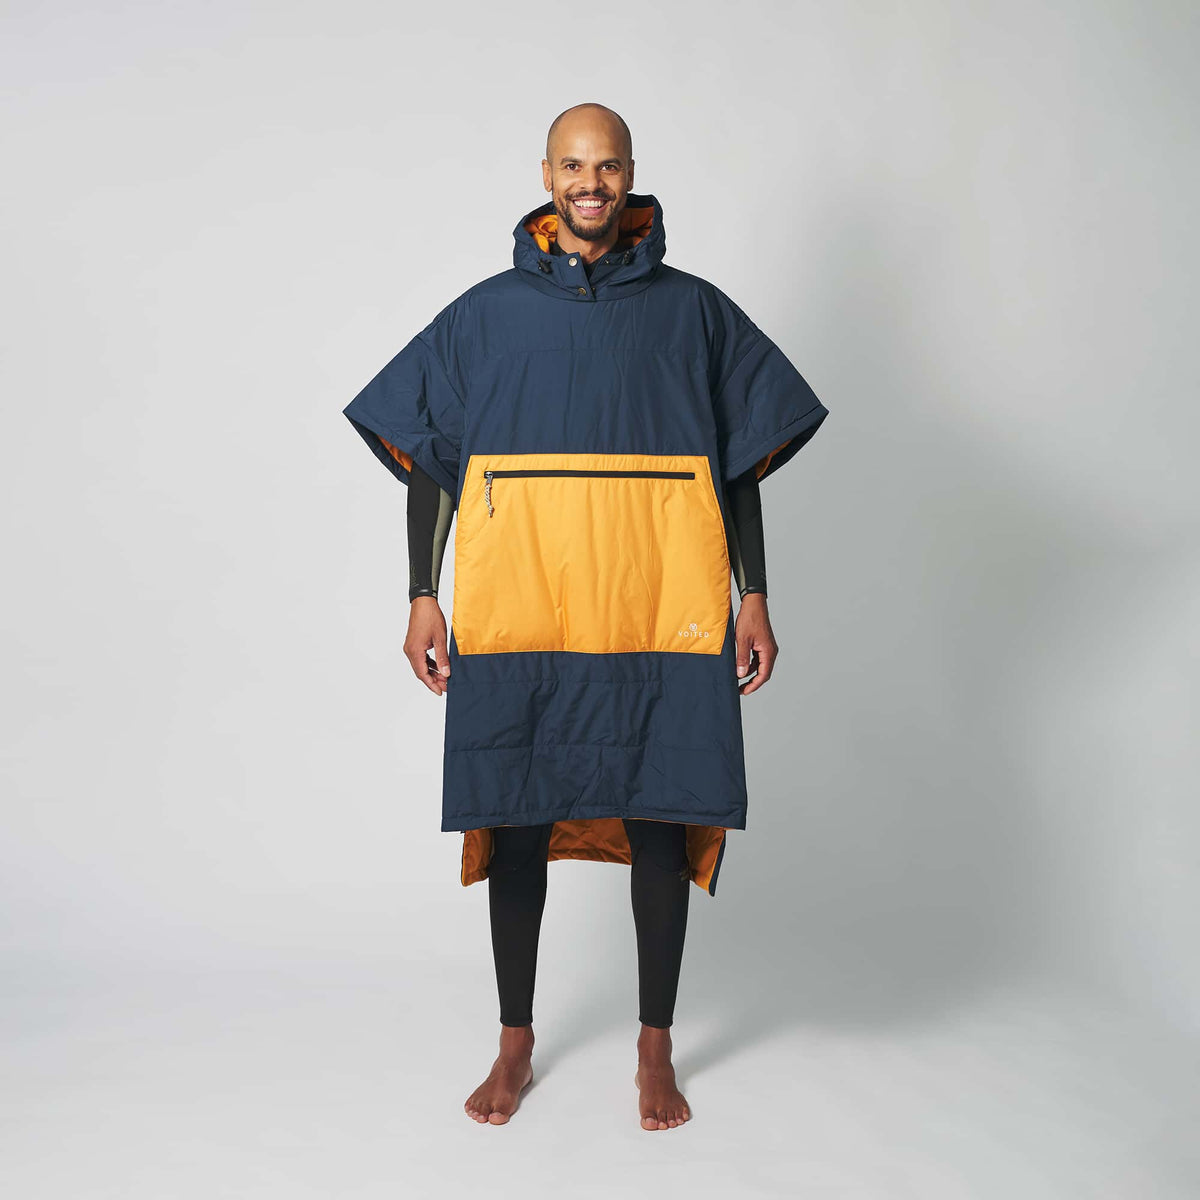 VOITED Outdoor Poncho for Surfing, Camping, Vanlife & Wild Swimming - Ocean Navy / Desert